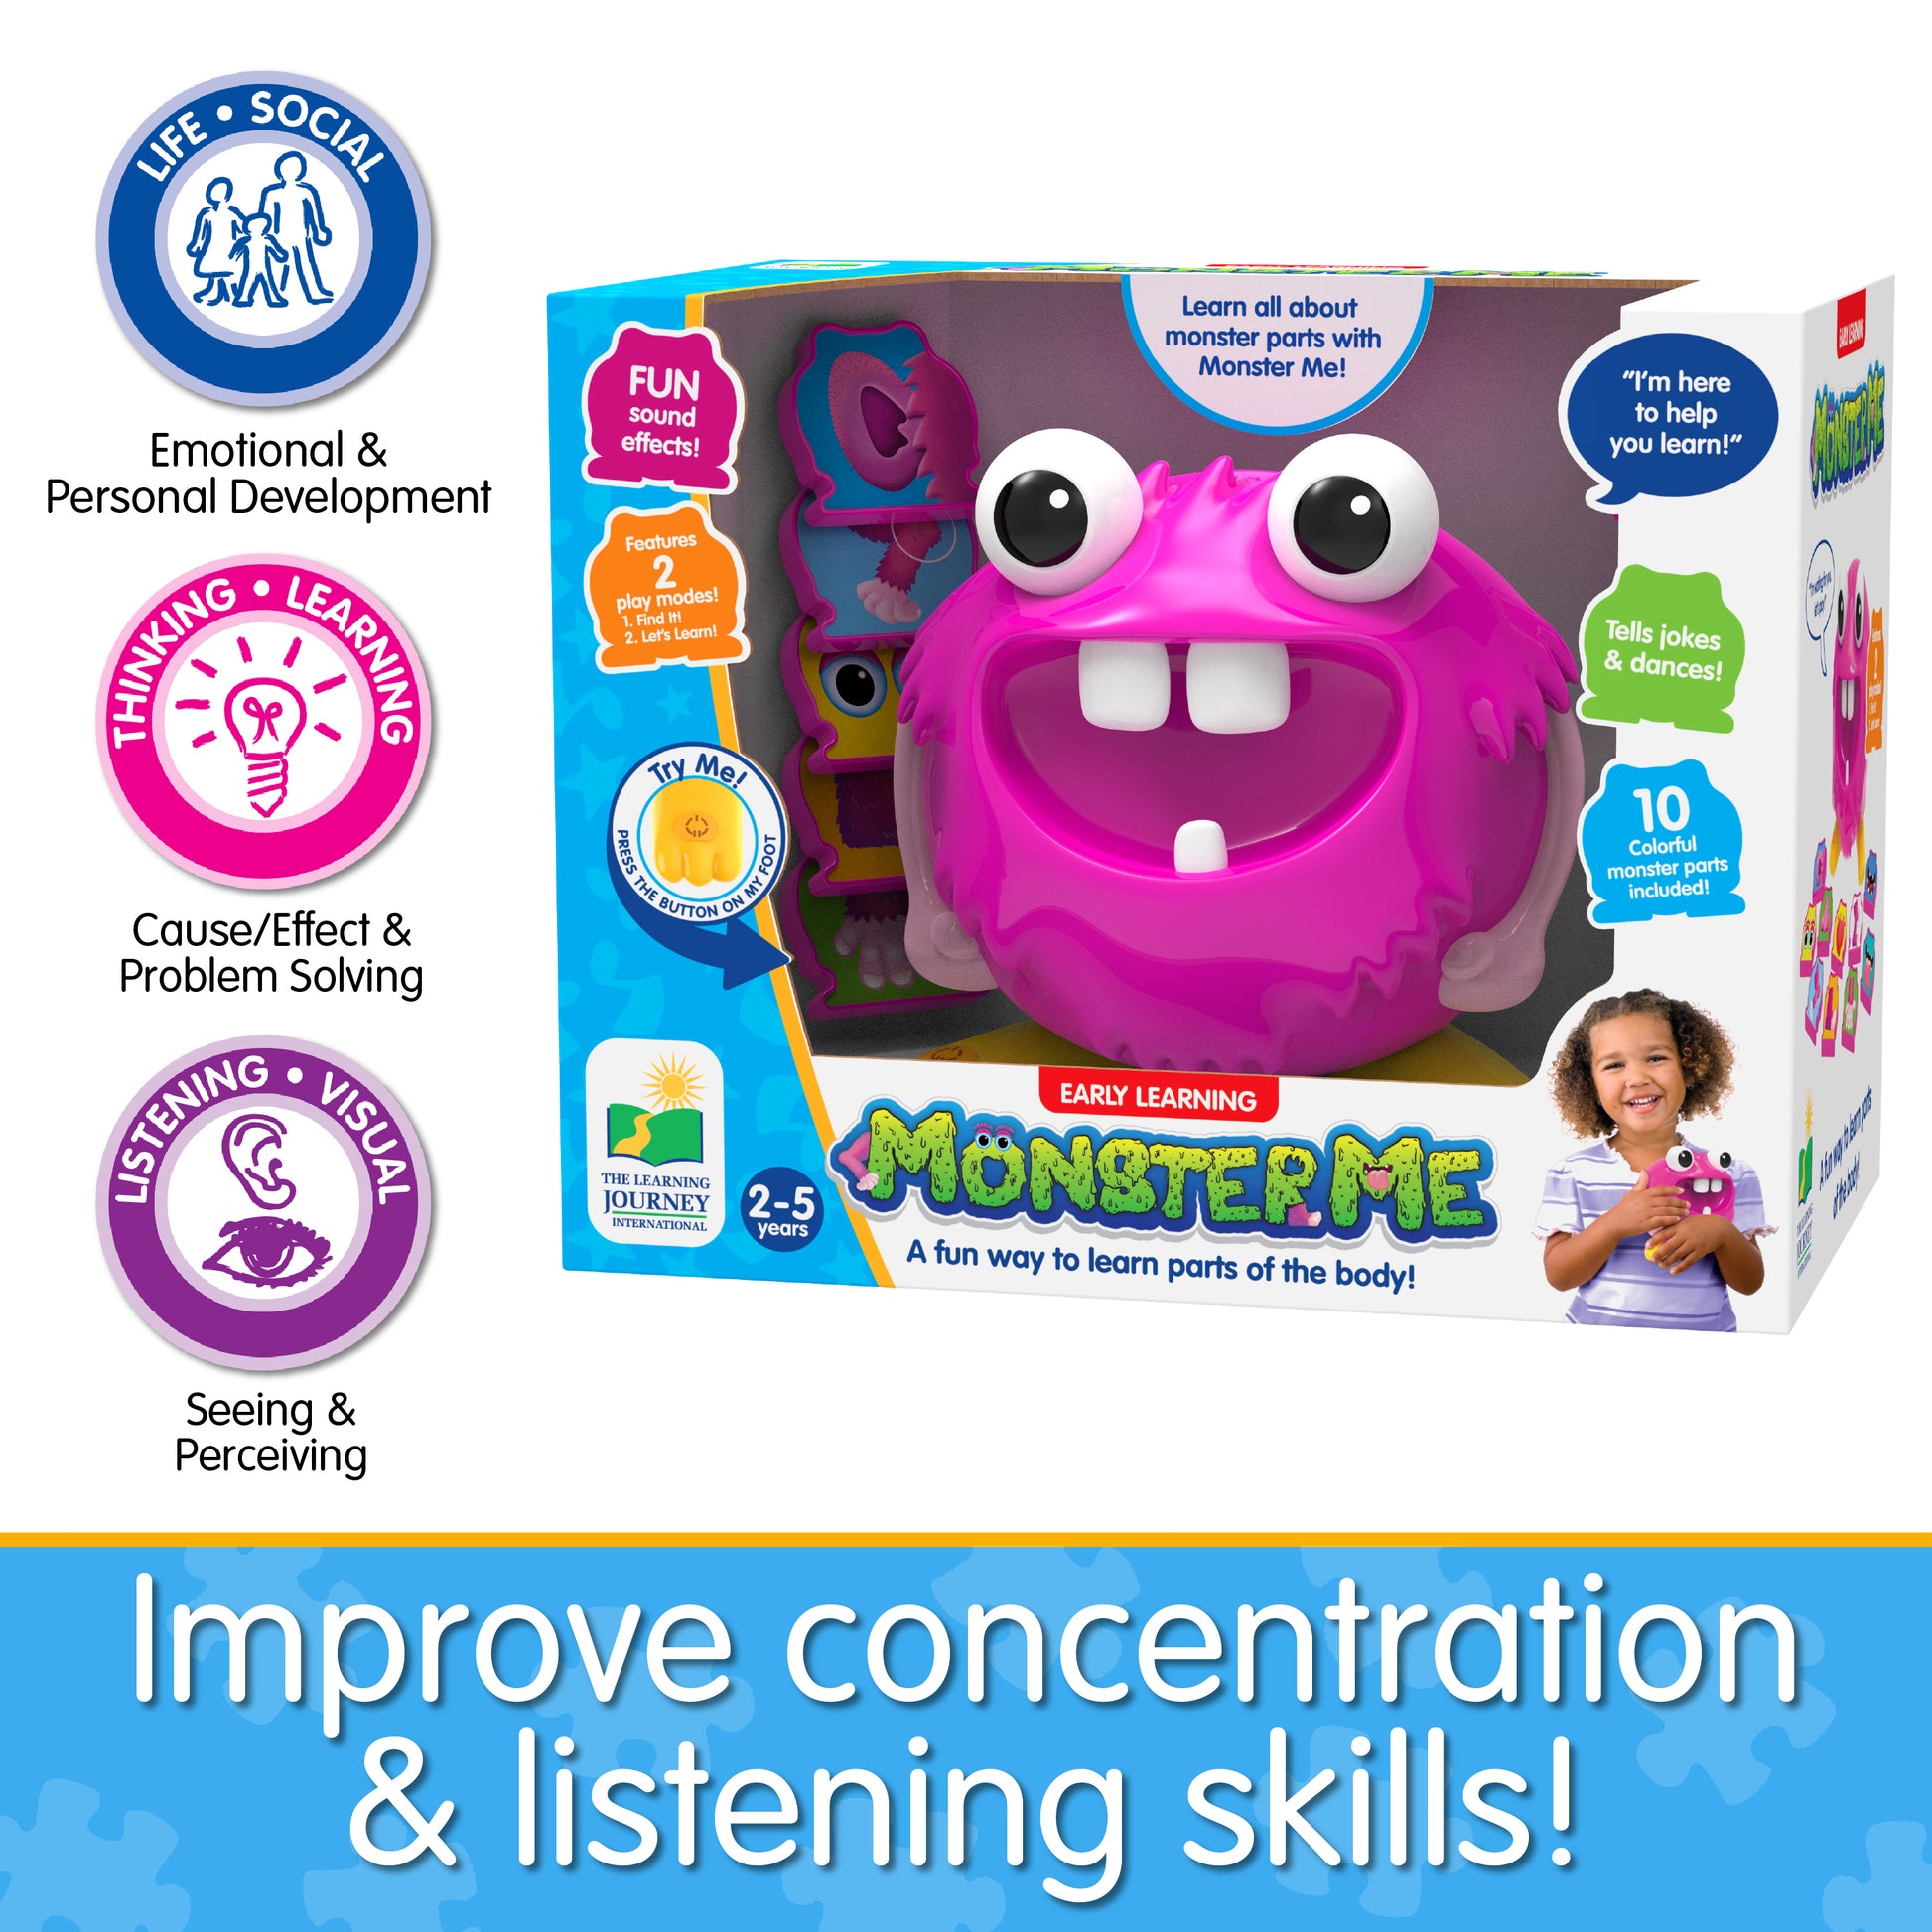 Infographic about Monster Me's educational benefits that says, "Improve concentration and listening skills!"